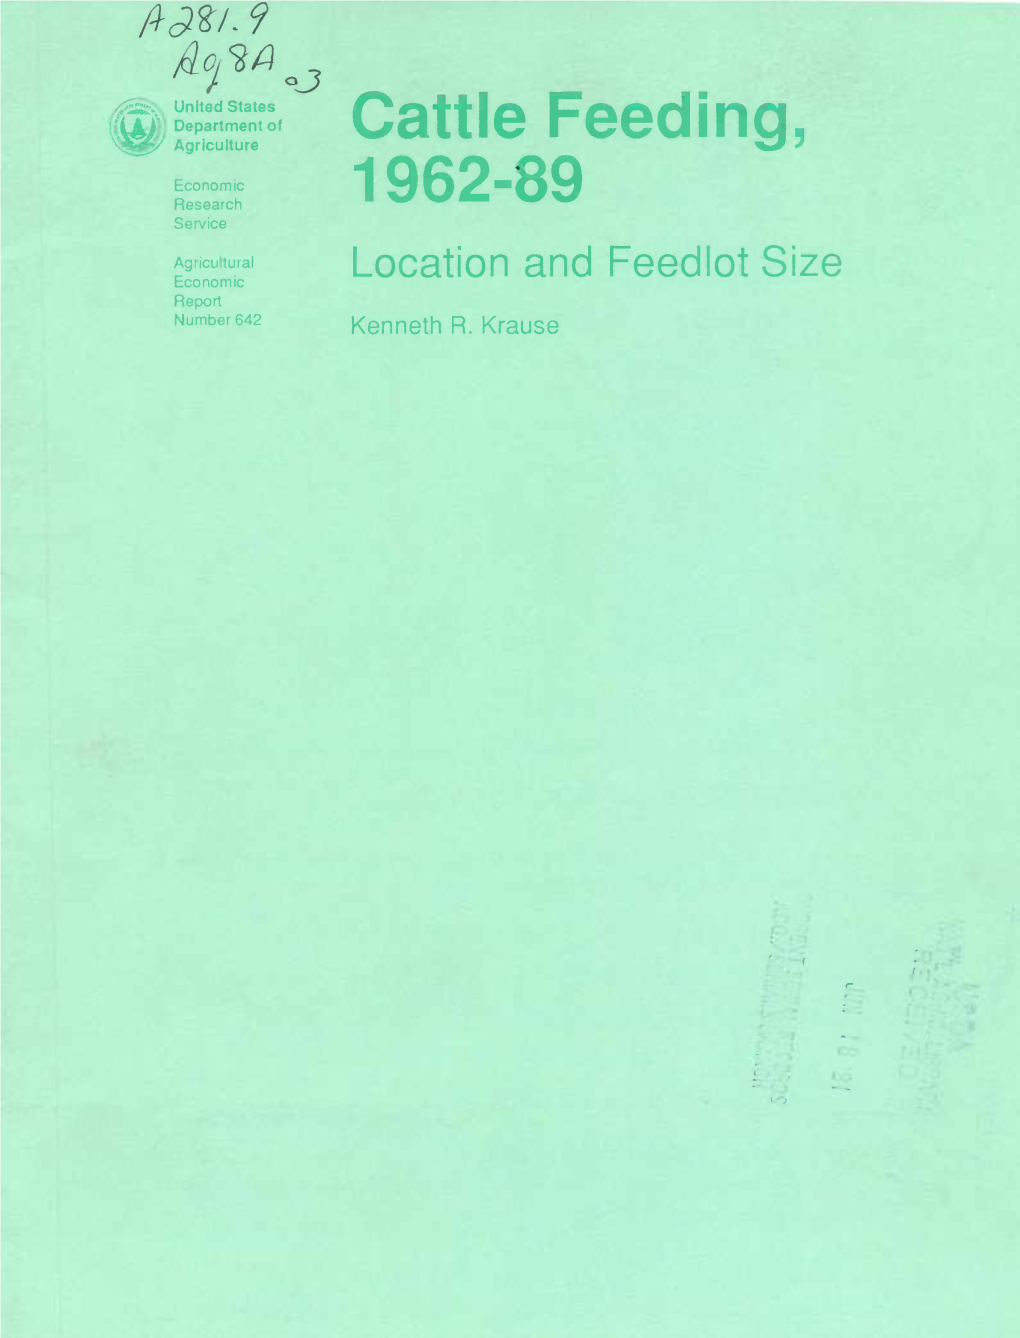 Cattle Feeding, 1962-89: Location and Feedlot Size (AER-642)